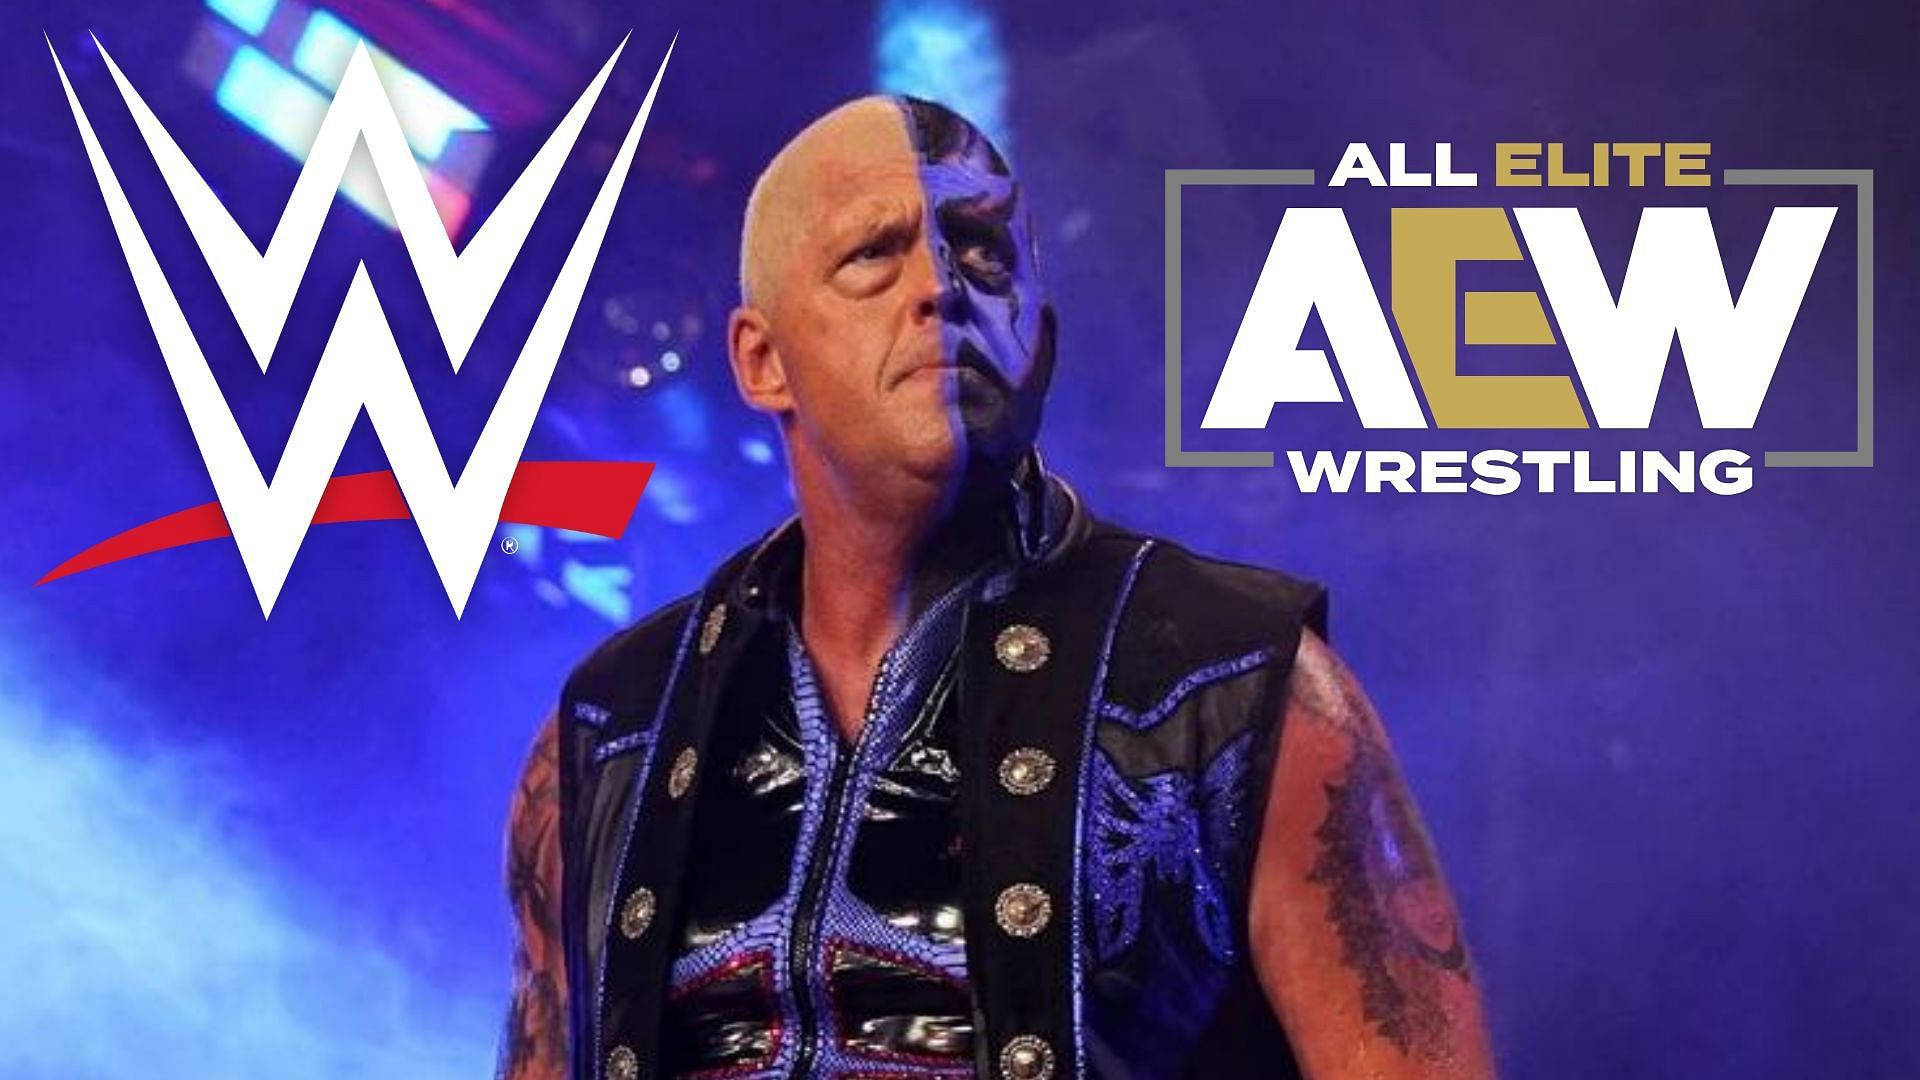 Who should be the final opponent for Dustin Rhodes?